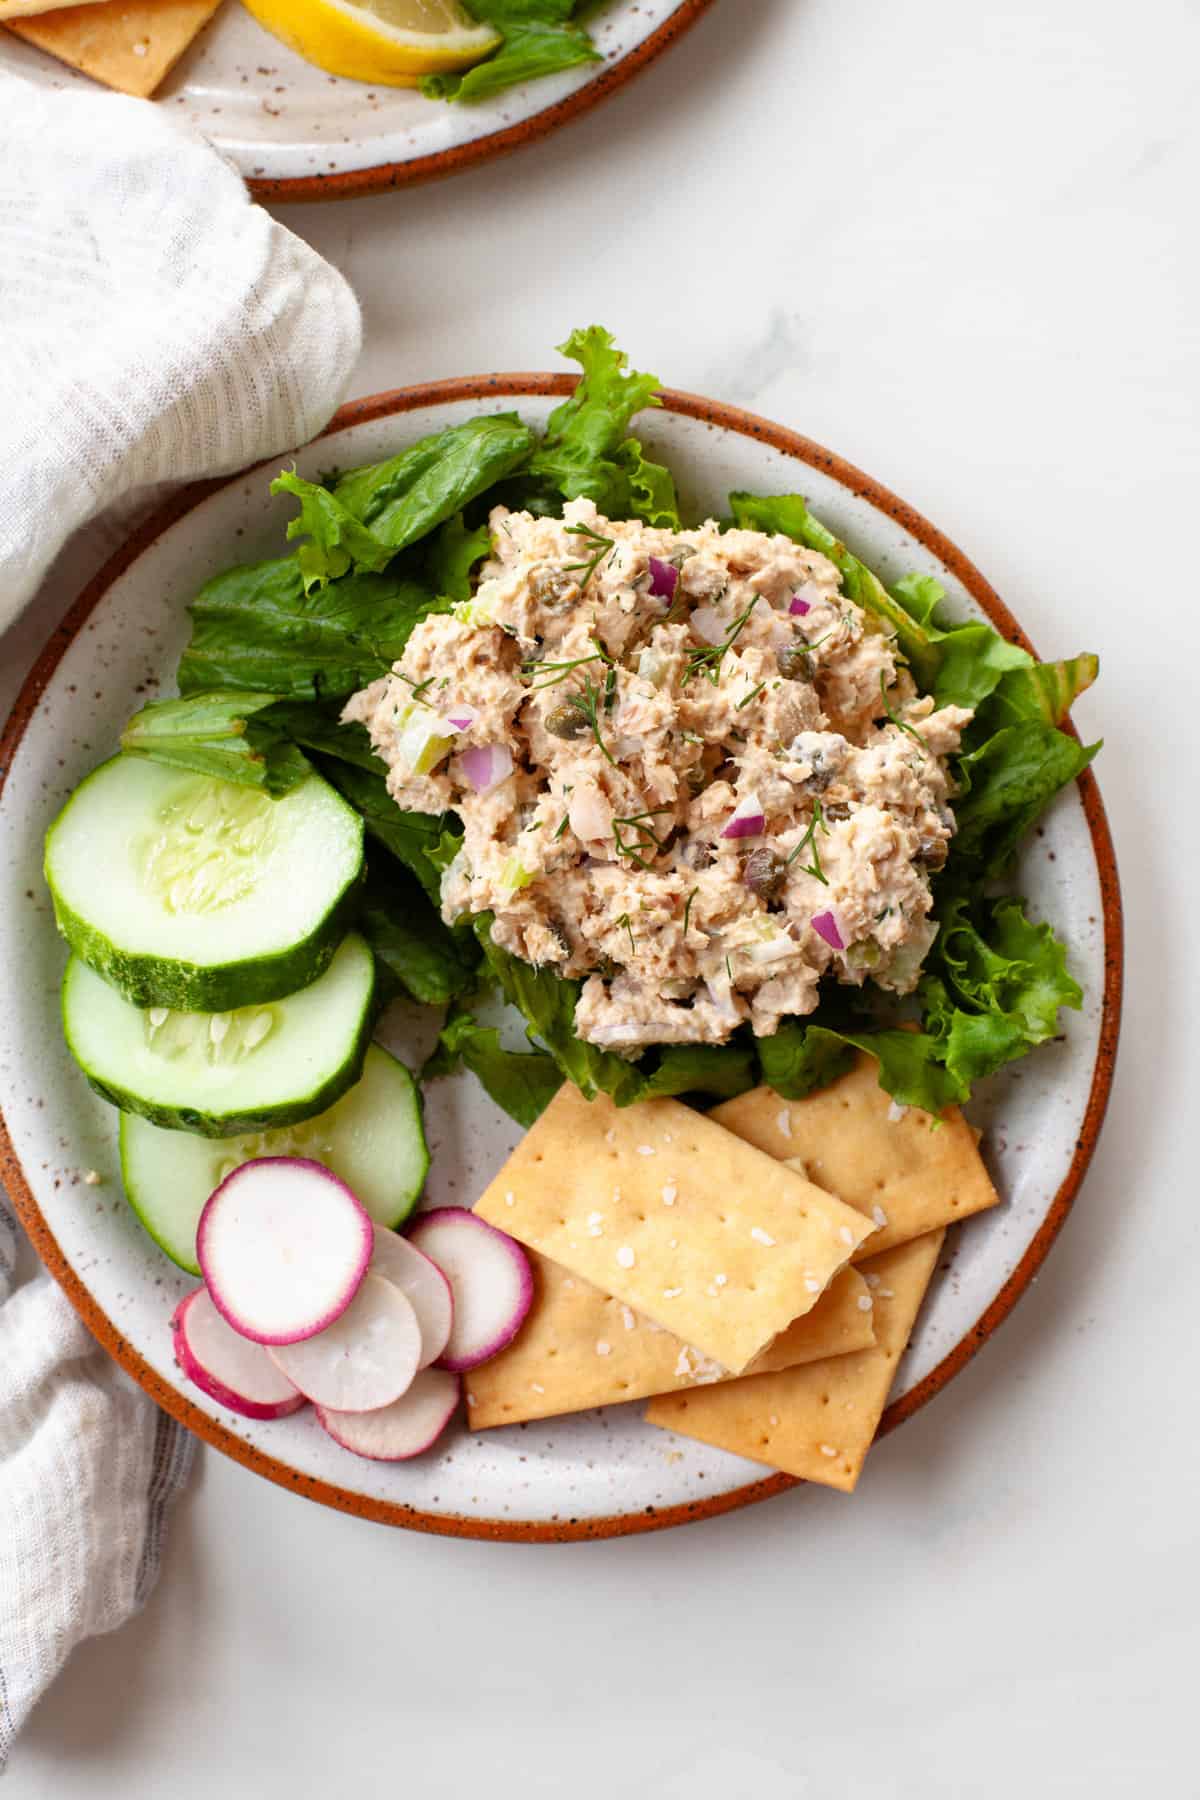 canned salmon salad on a bed of lettuce with cucumbers, radishes, and crackers on speckled plate